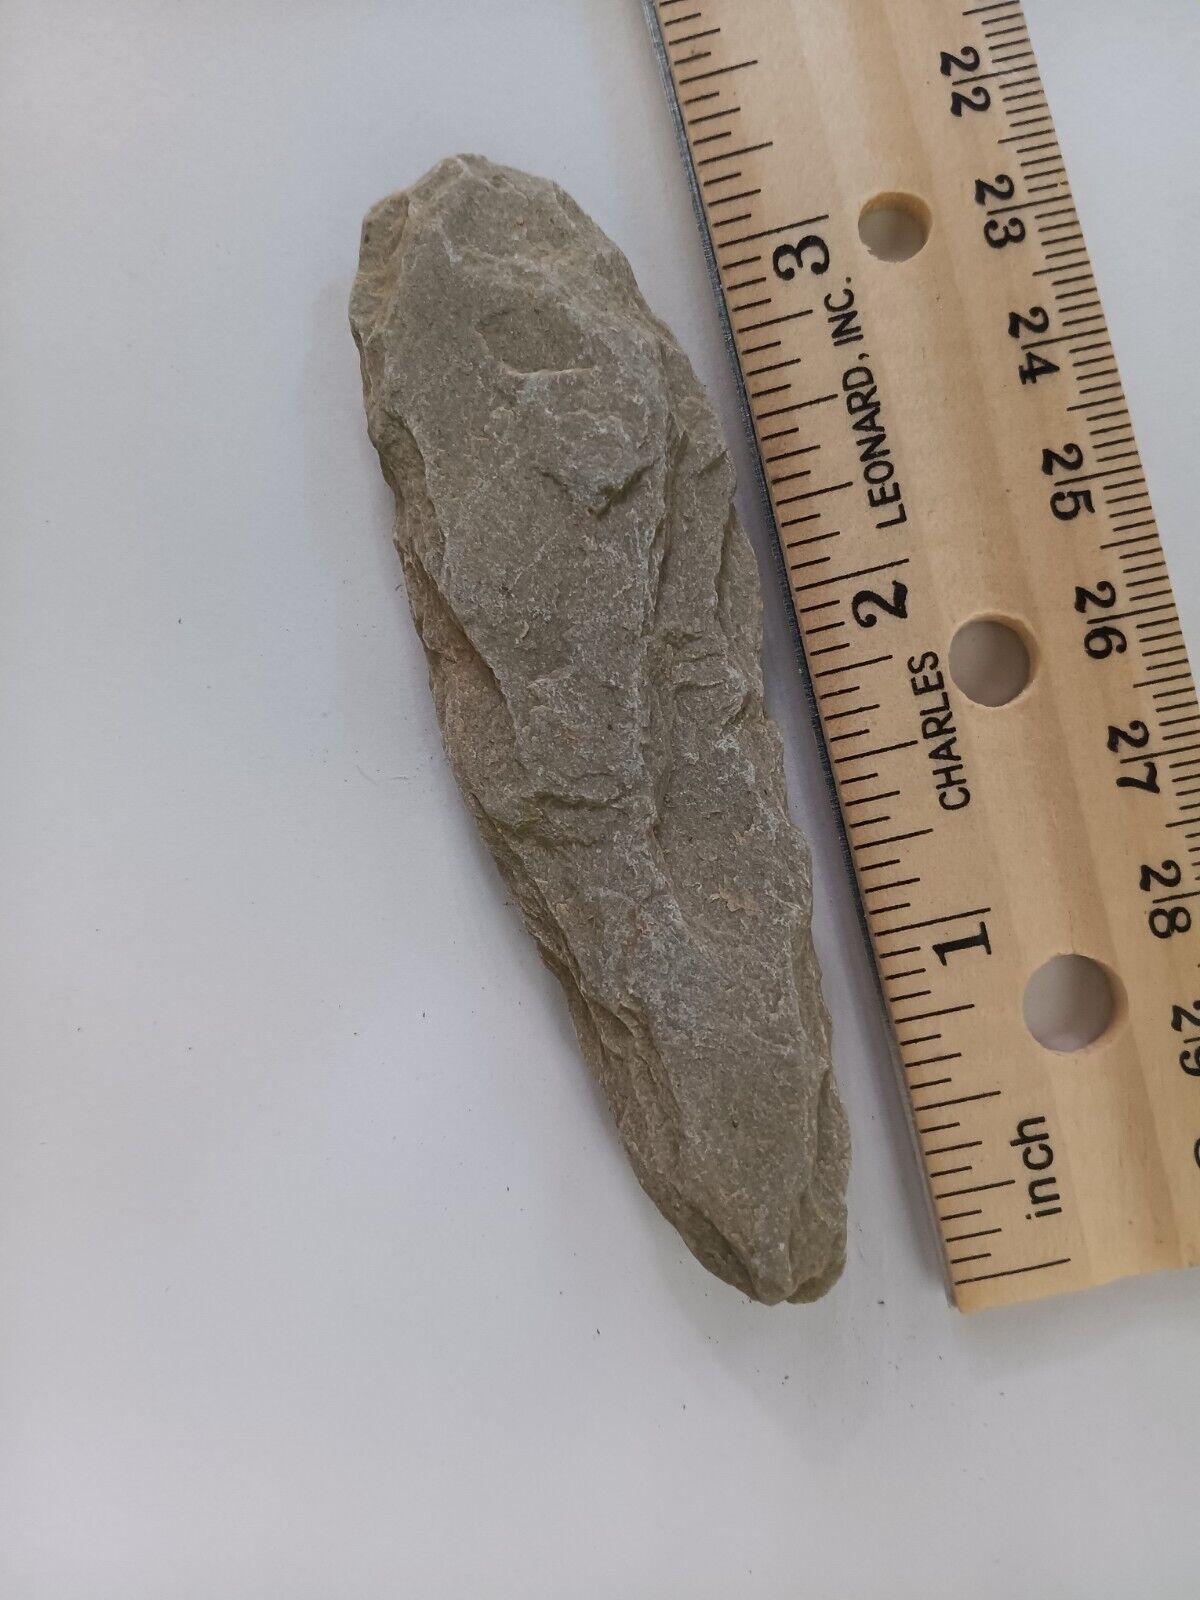 AUTHENTIC NATIVE AMERICAN INDIAN ARTIFACT FOUND, EASTERN N.C.--- CCC/35